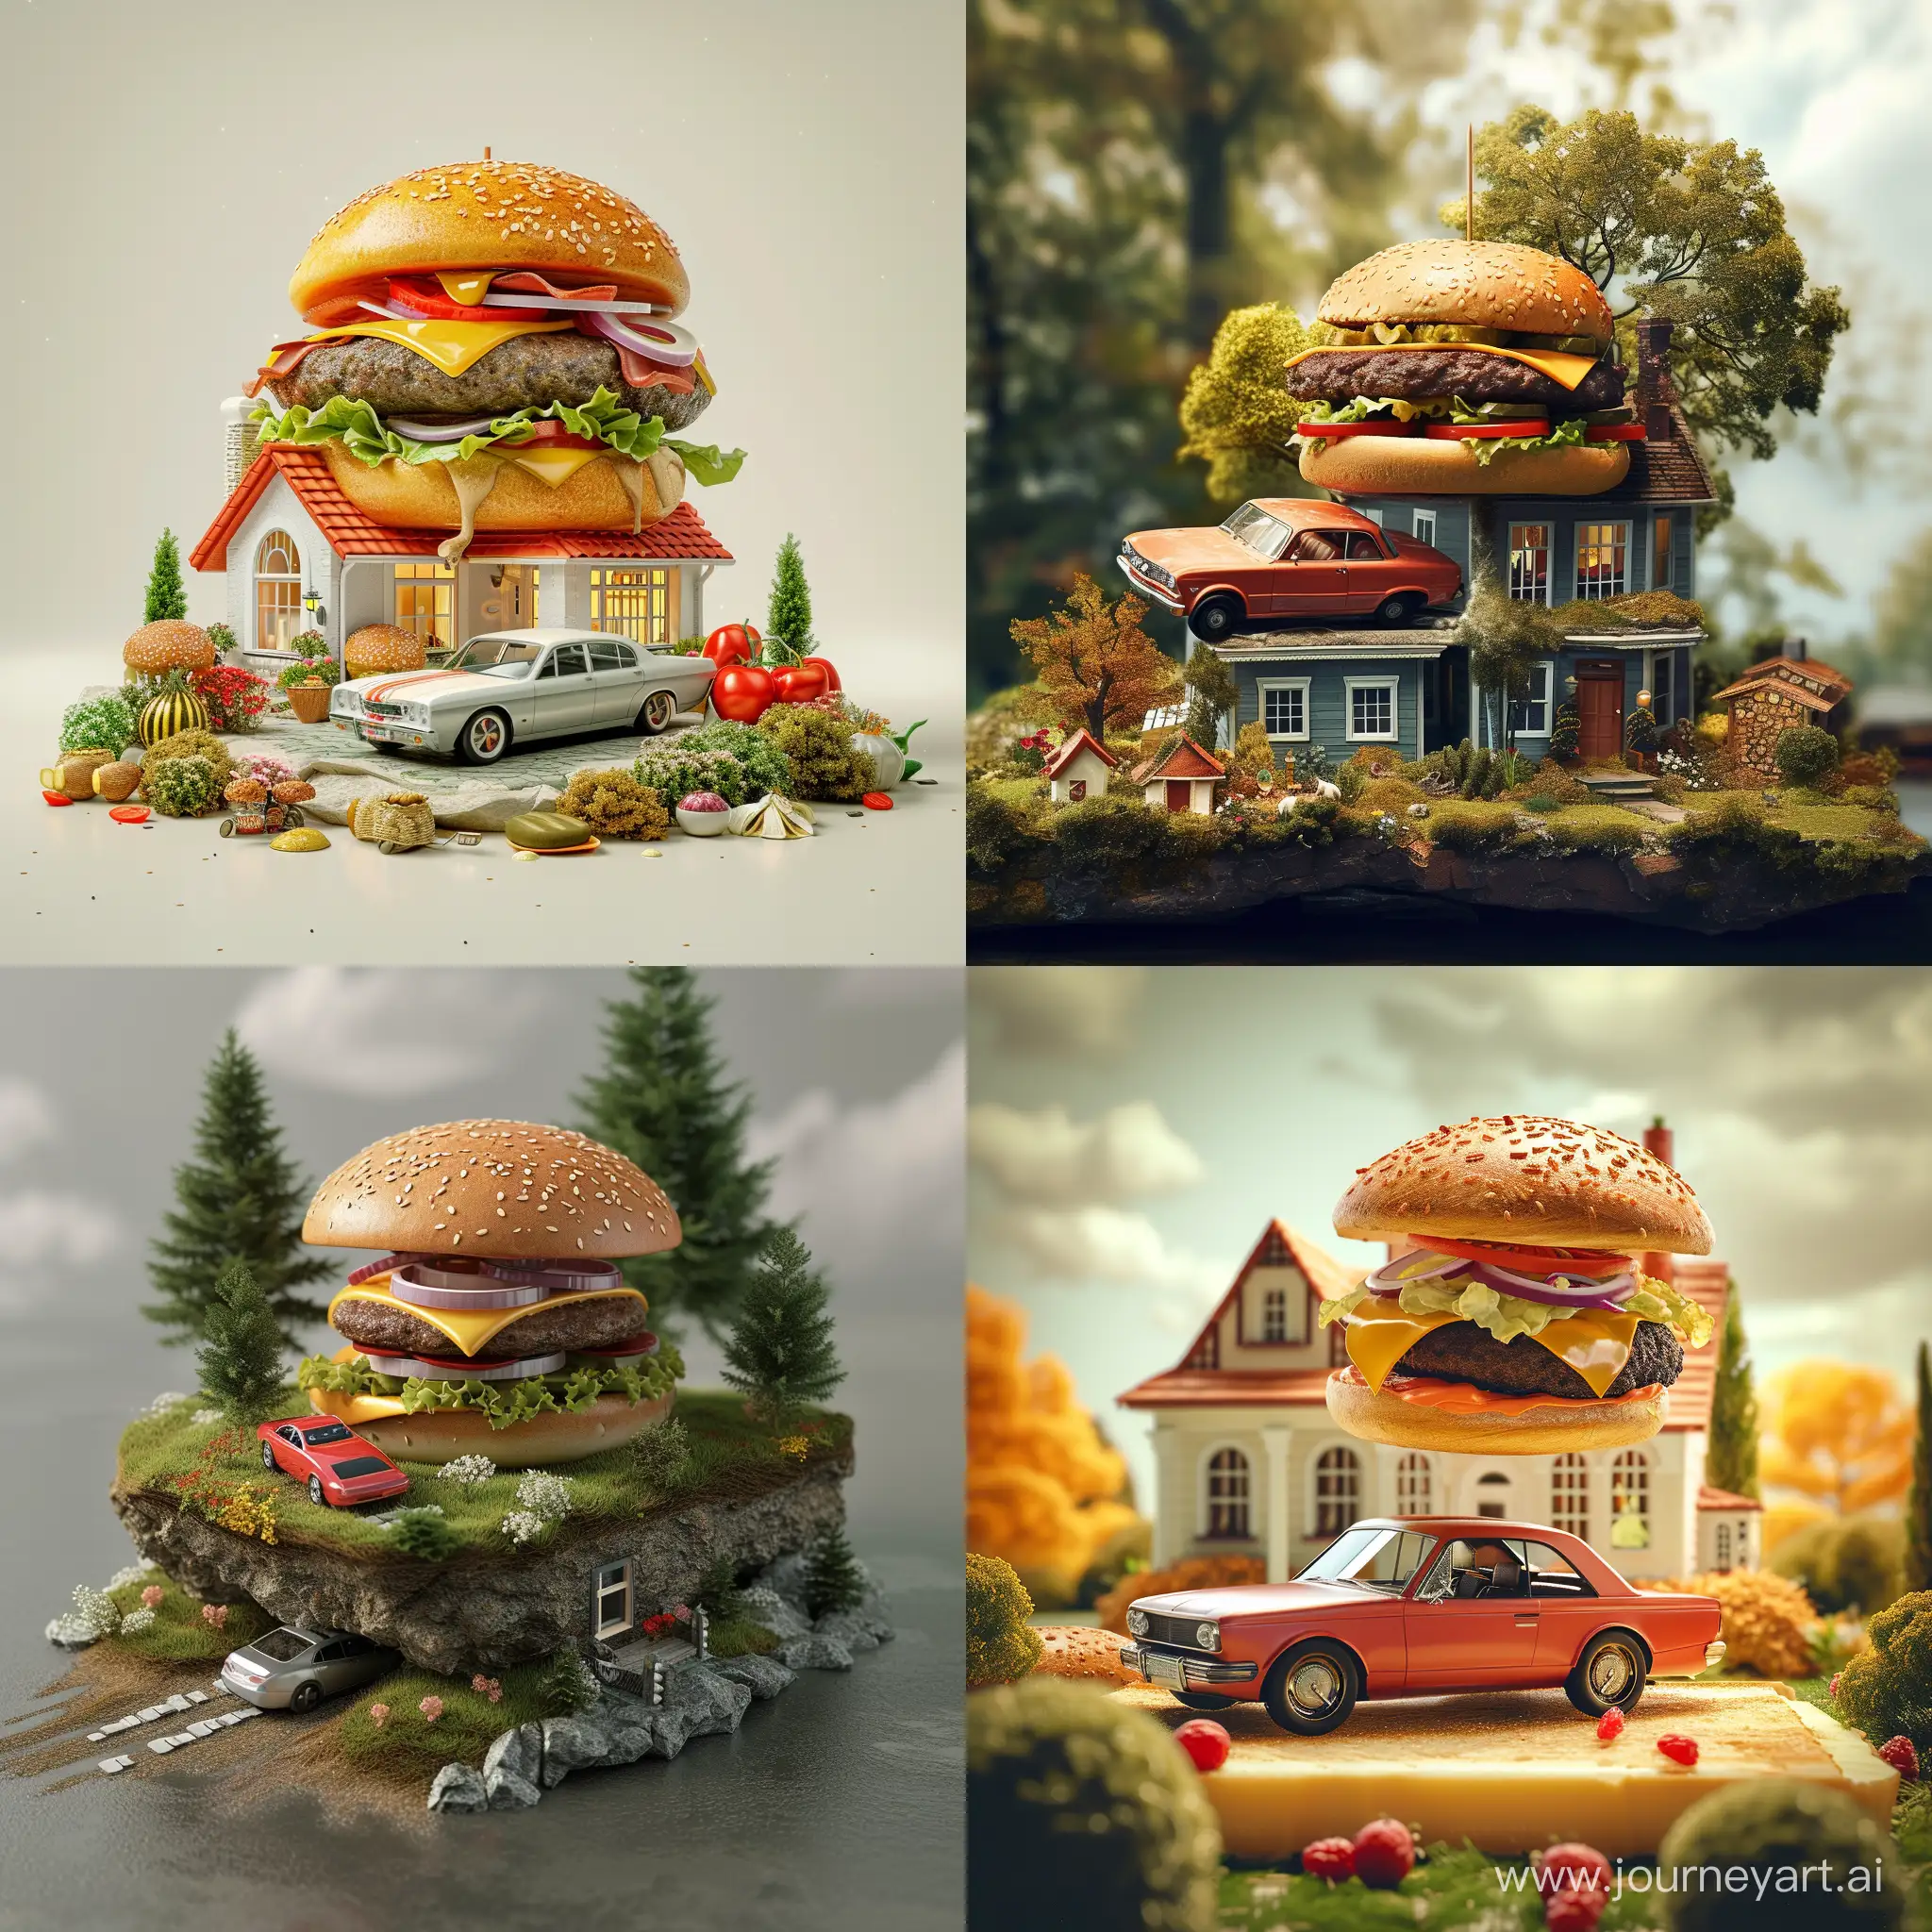 Fantasy-Fusion-Burger-Car-and-House-Blend-in-Realistic-Art